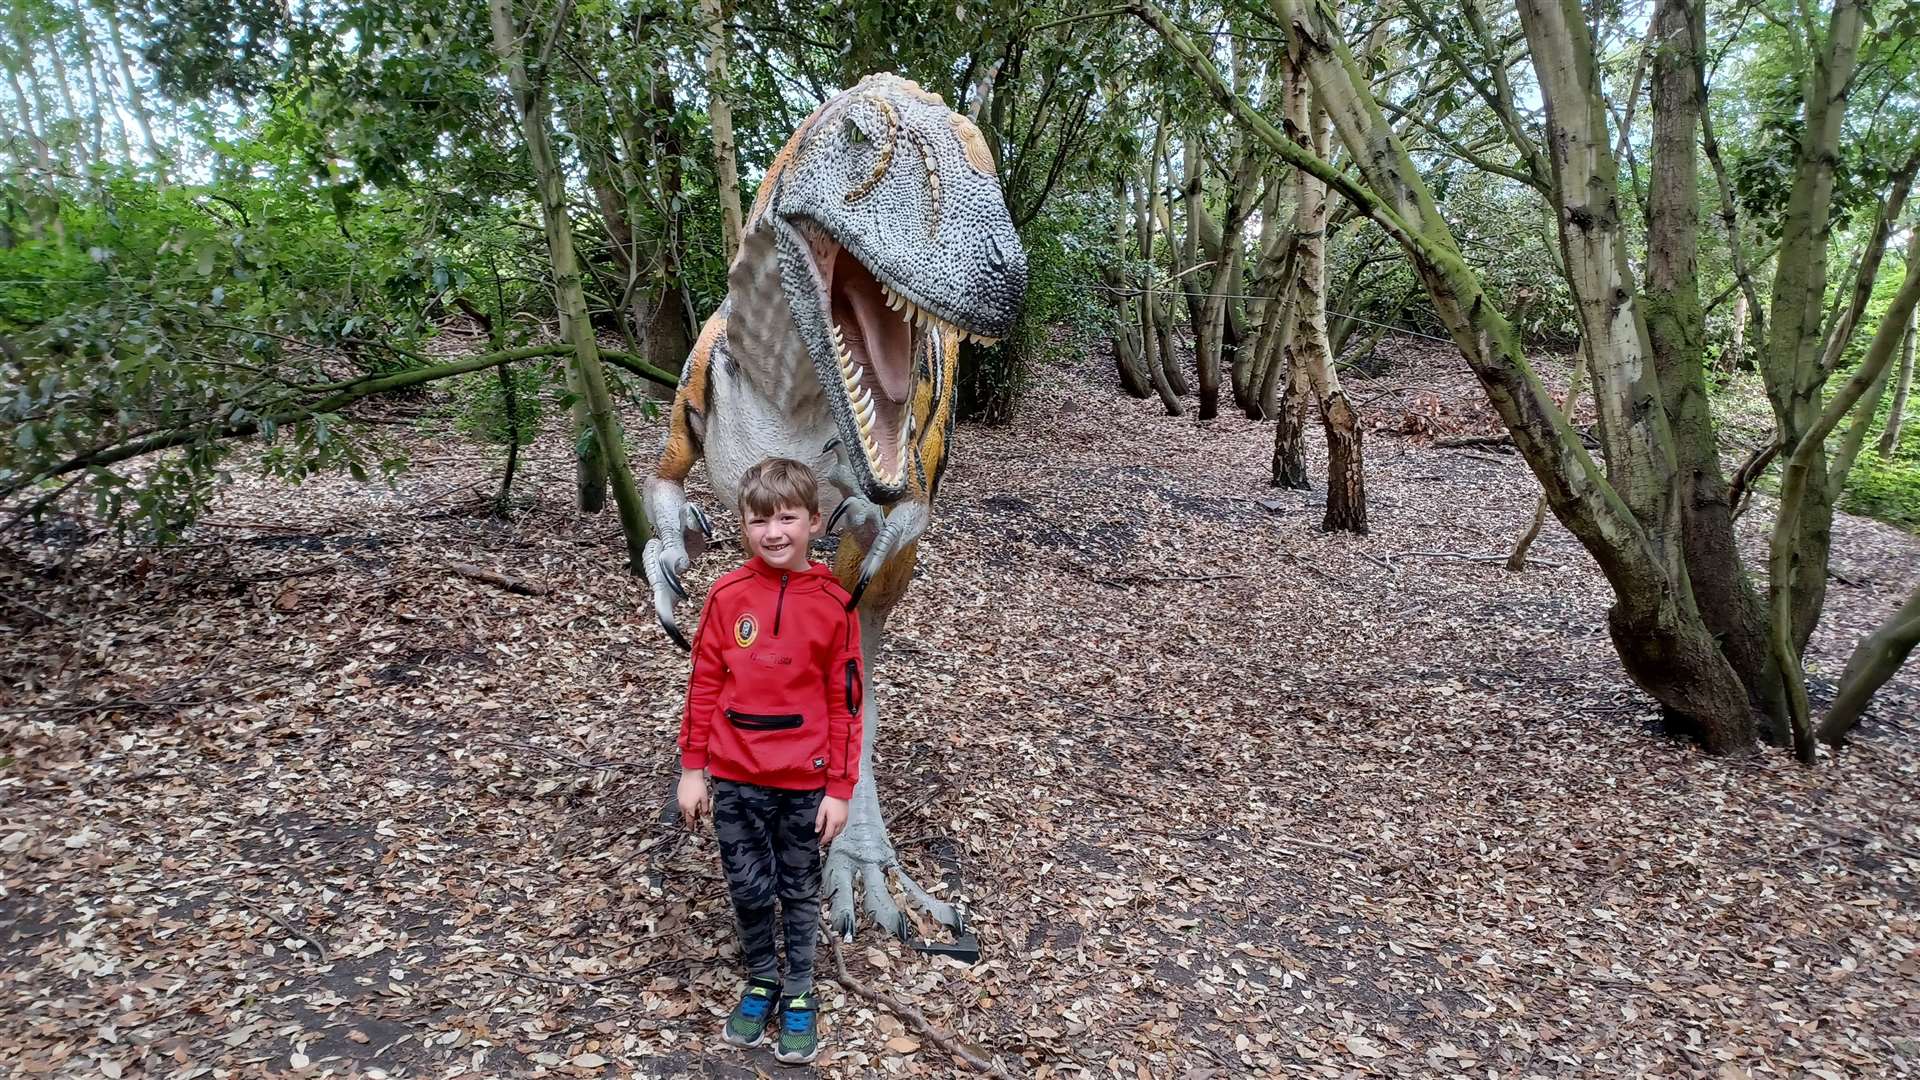 We went looking for the escaped dinosaur at Betteshanger Country Park